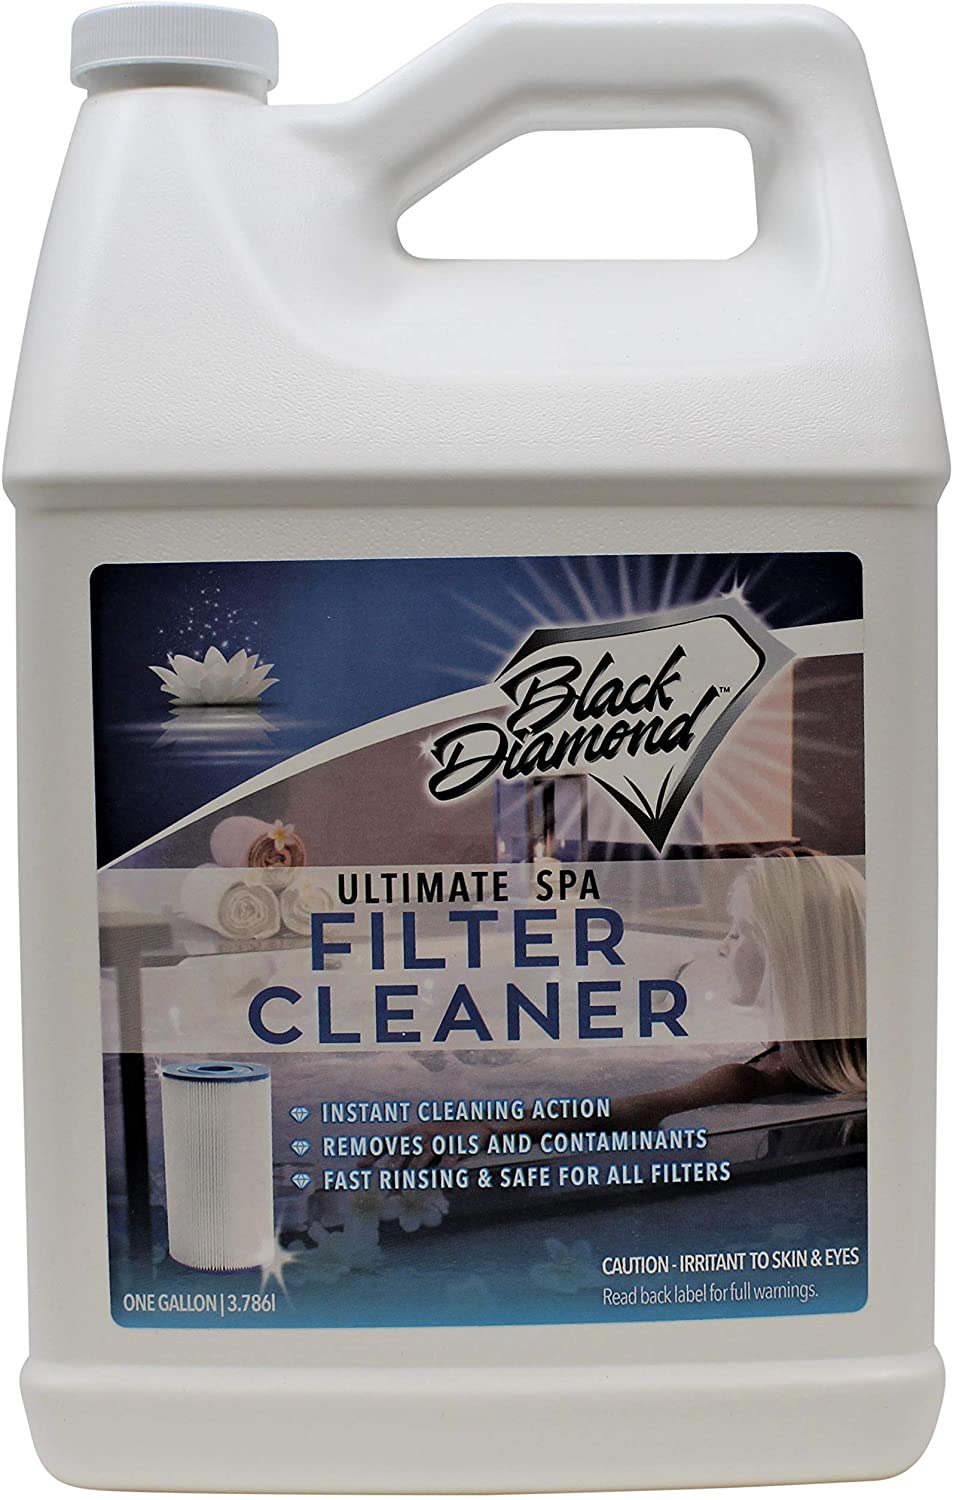 Ultimate Spa Filter Cleaner Fast-Acting Spray for Hot Tub, Jacuzzi & Pool Filters